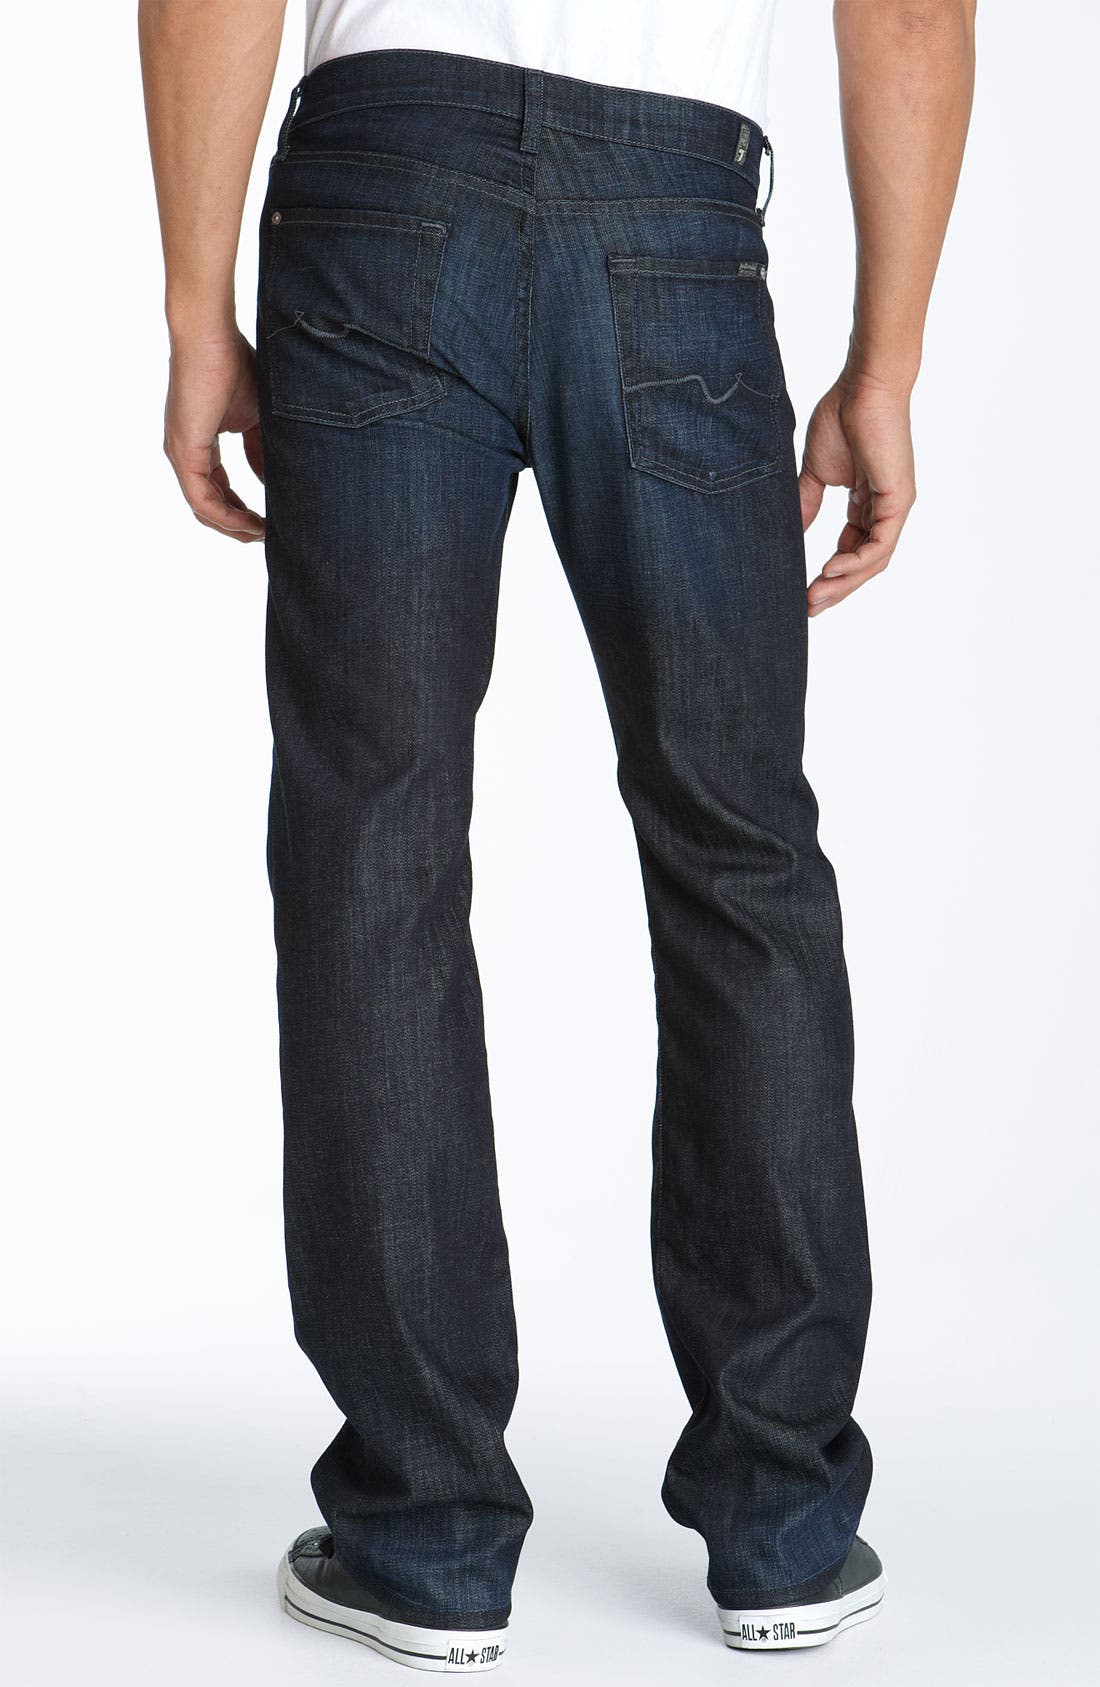 7 For All Mankind Fit Jeans Guide - The Hut